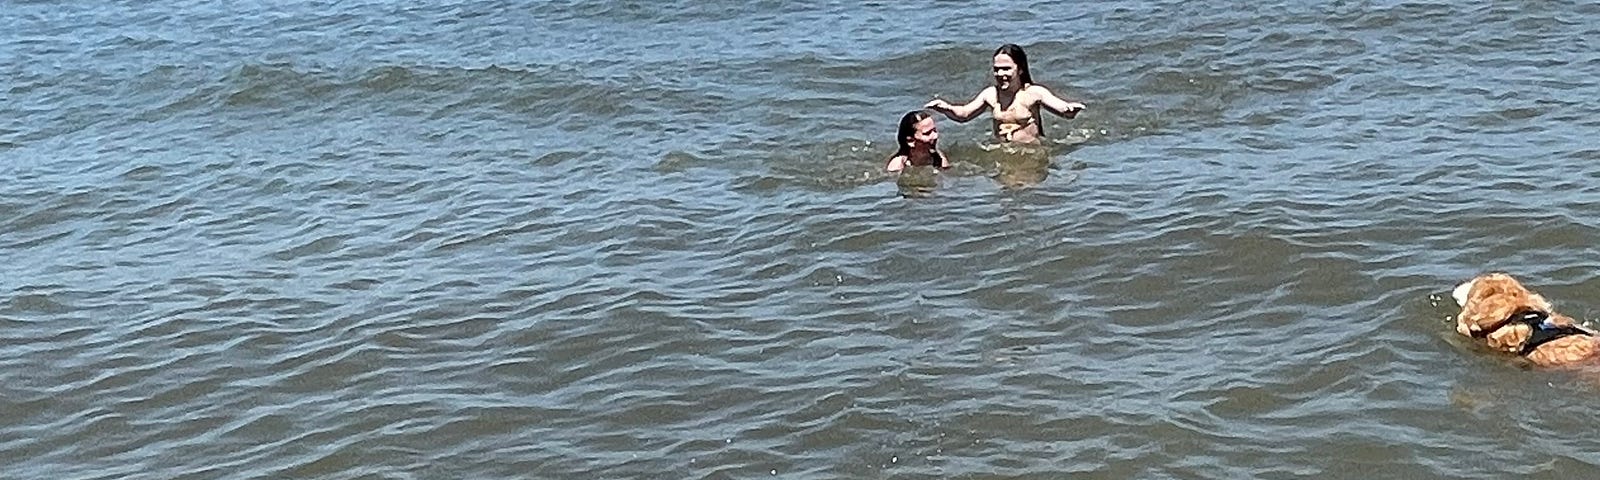 Children swim in the waters of the Chesapeake Bay while their dogs paddle out to them.